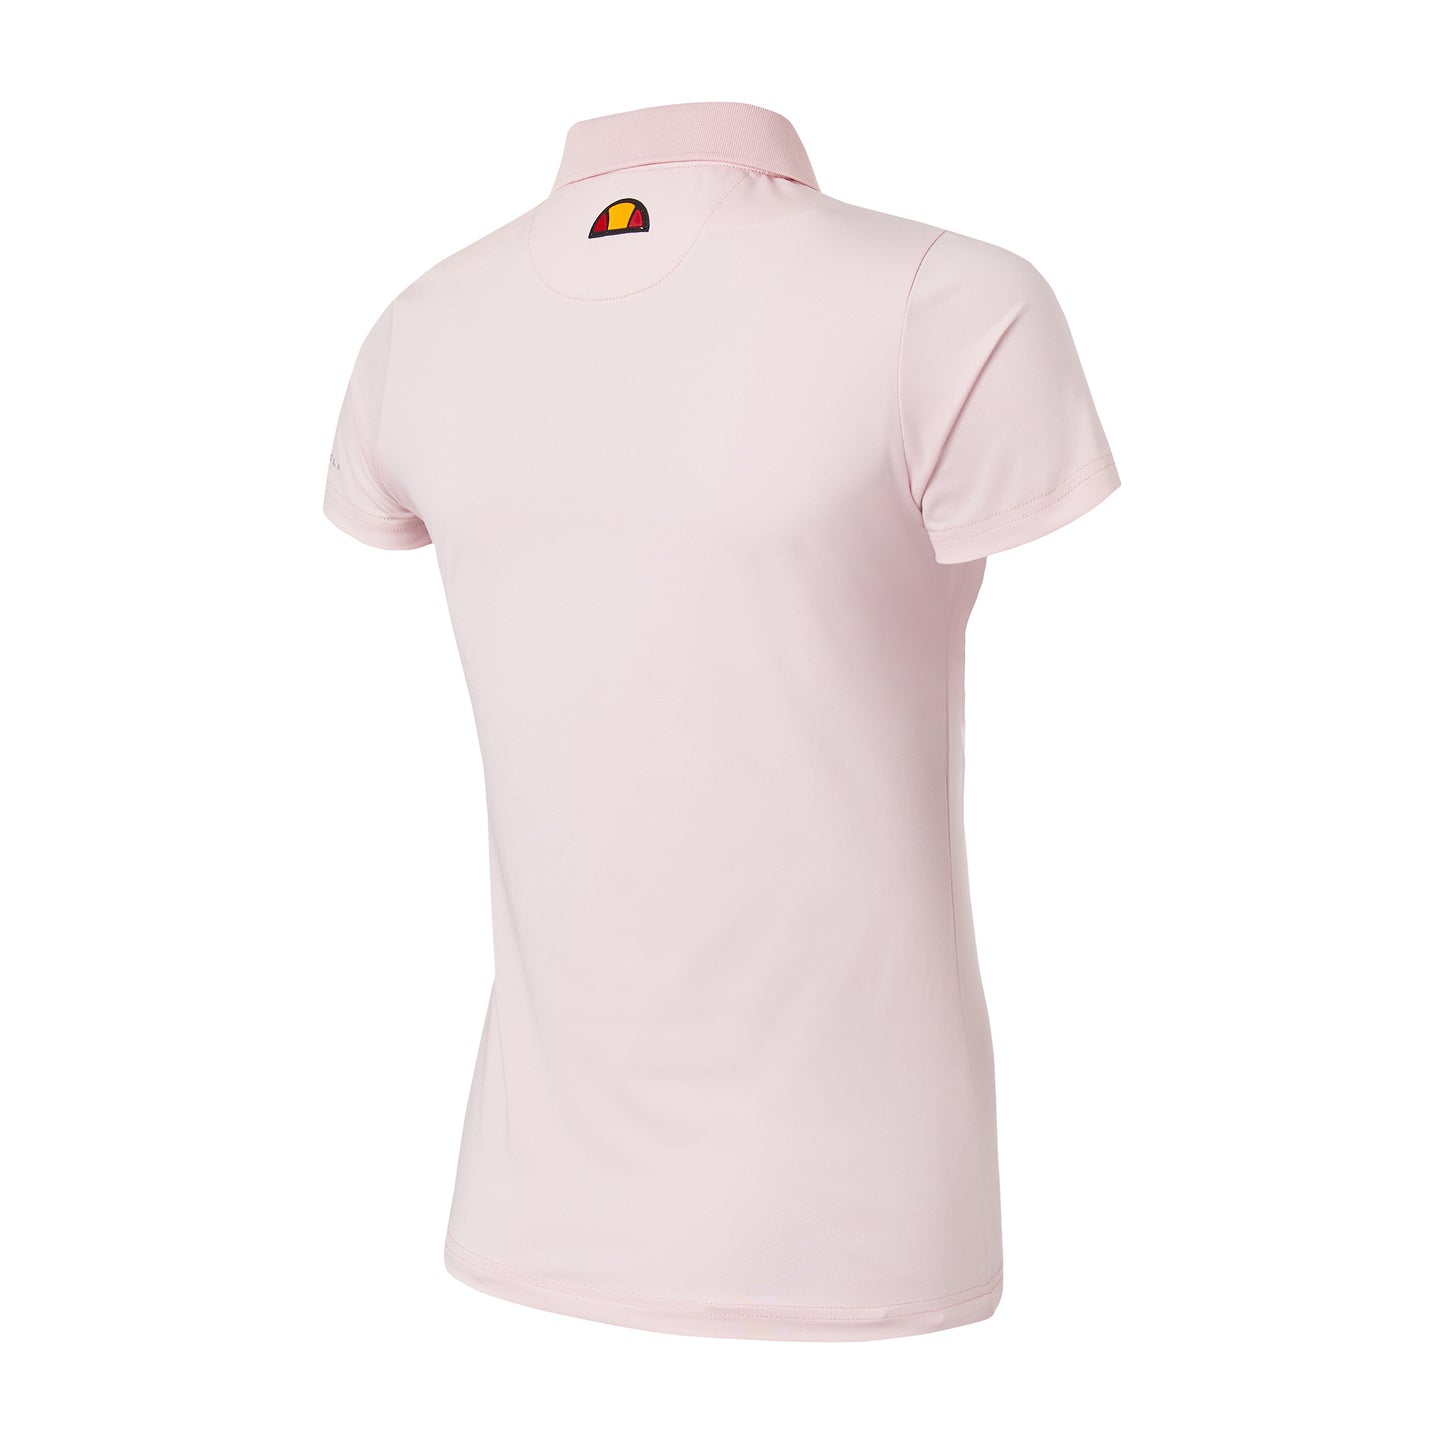 Ellesse Women's Short Sleeve Polo in Light Pink with Zip-Neck